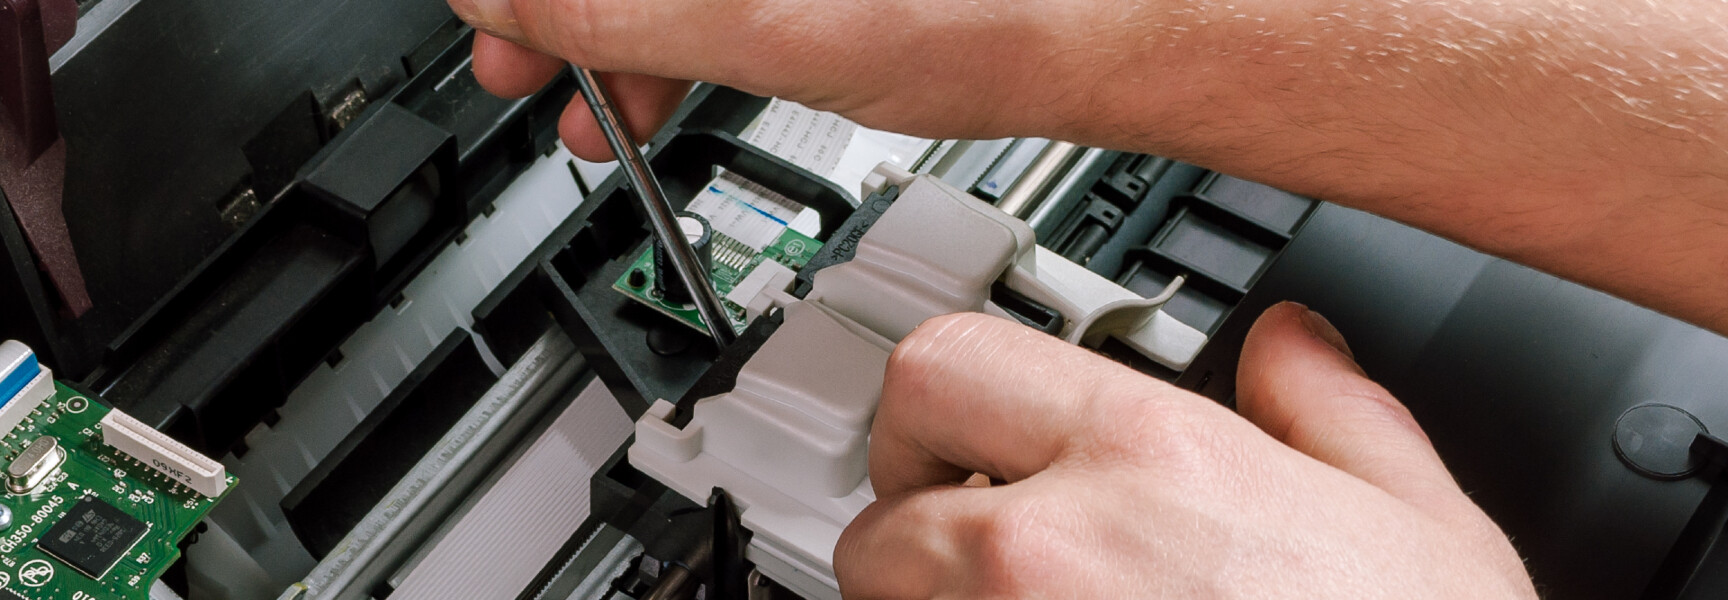 A close-up image of a printer being repaired.